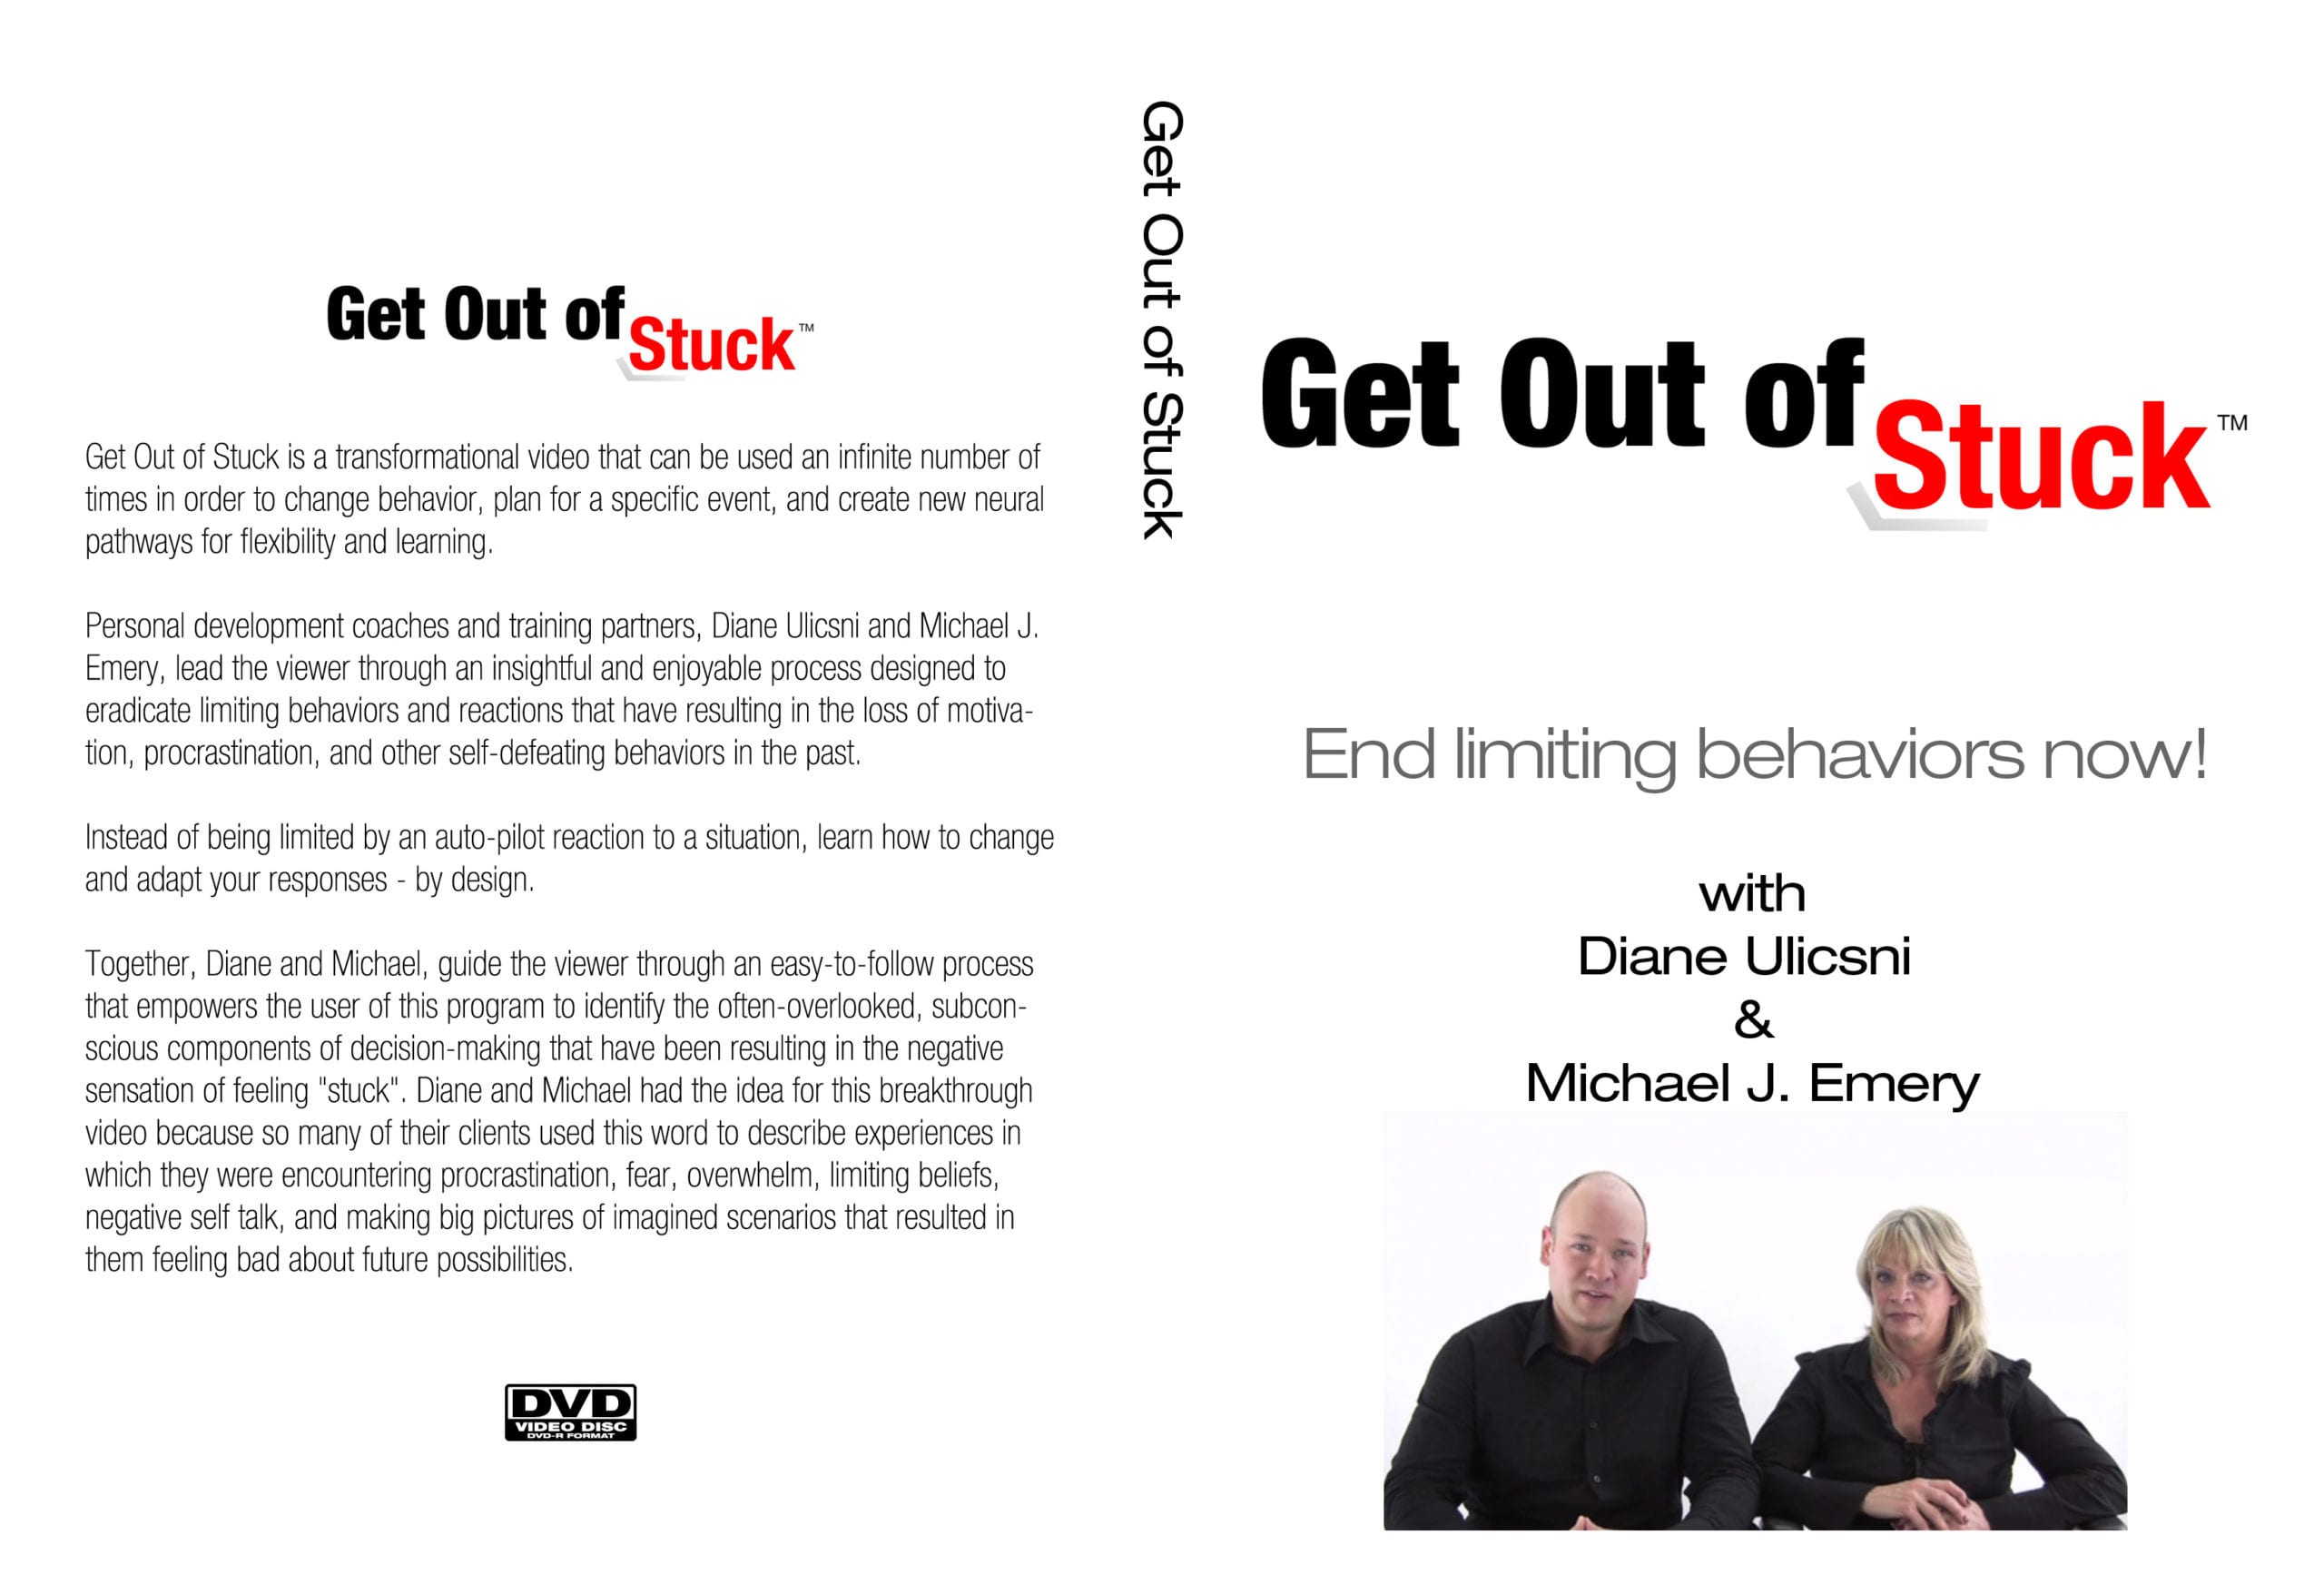 Get-Out-of-Stuck---DVDFullWrapCoverTemplate